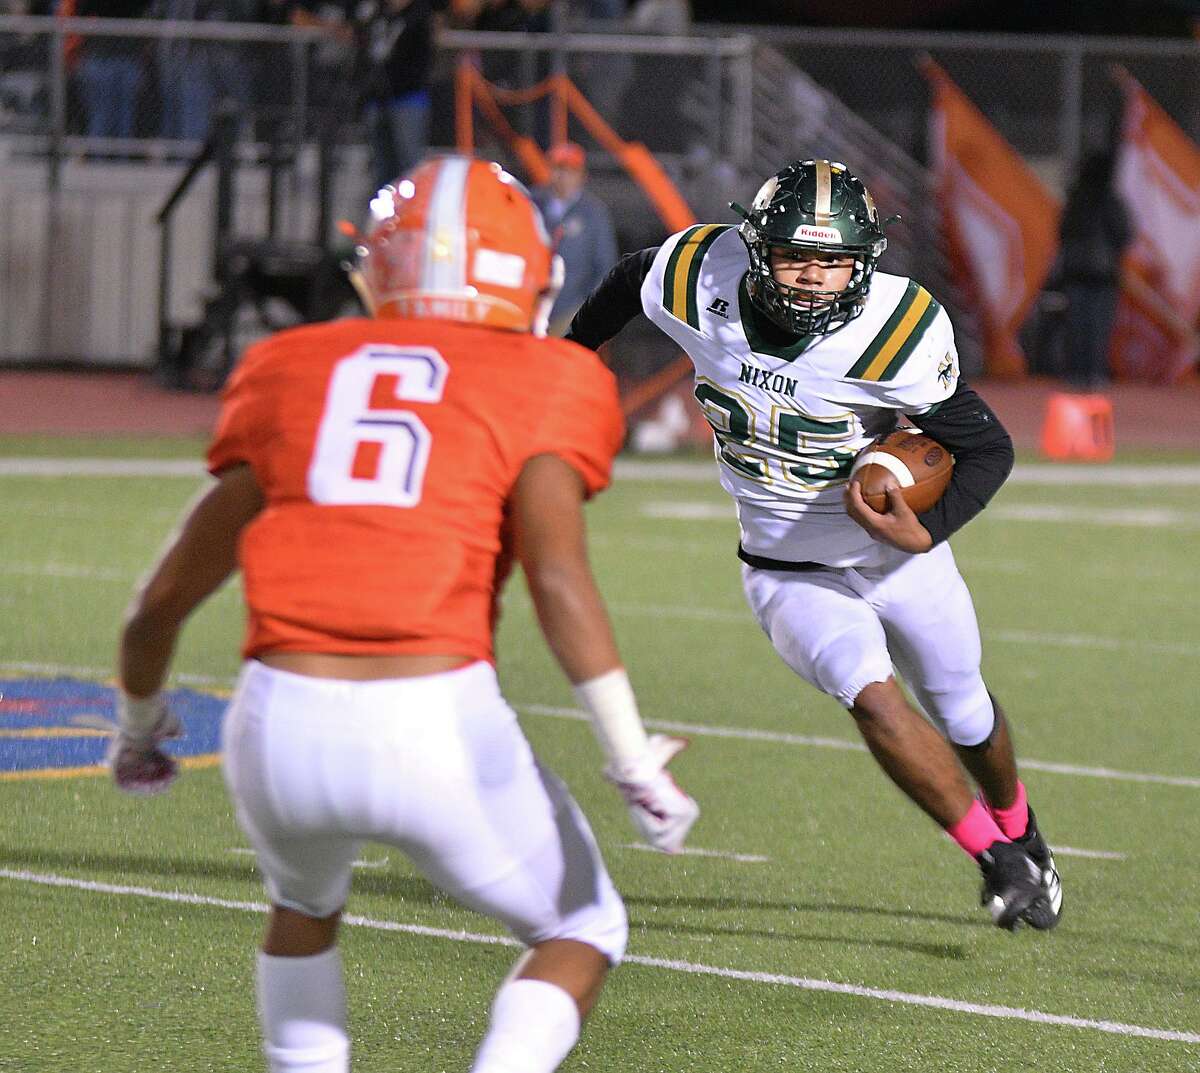 Pablo Tovar ran for 102 yards in Nixon’s 45-14 loss to United on Friday.